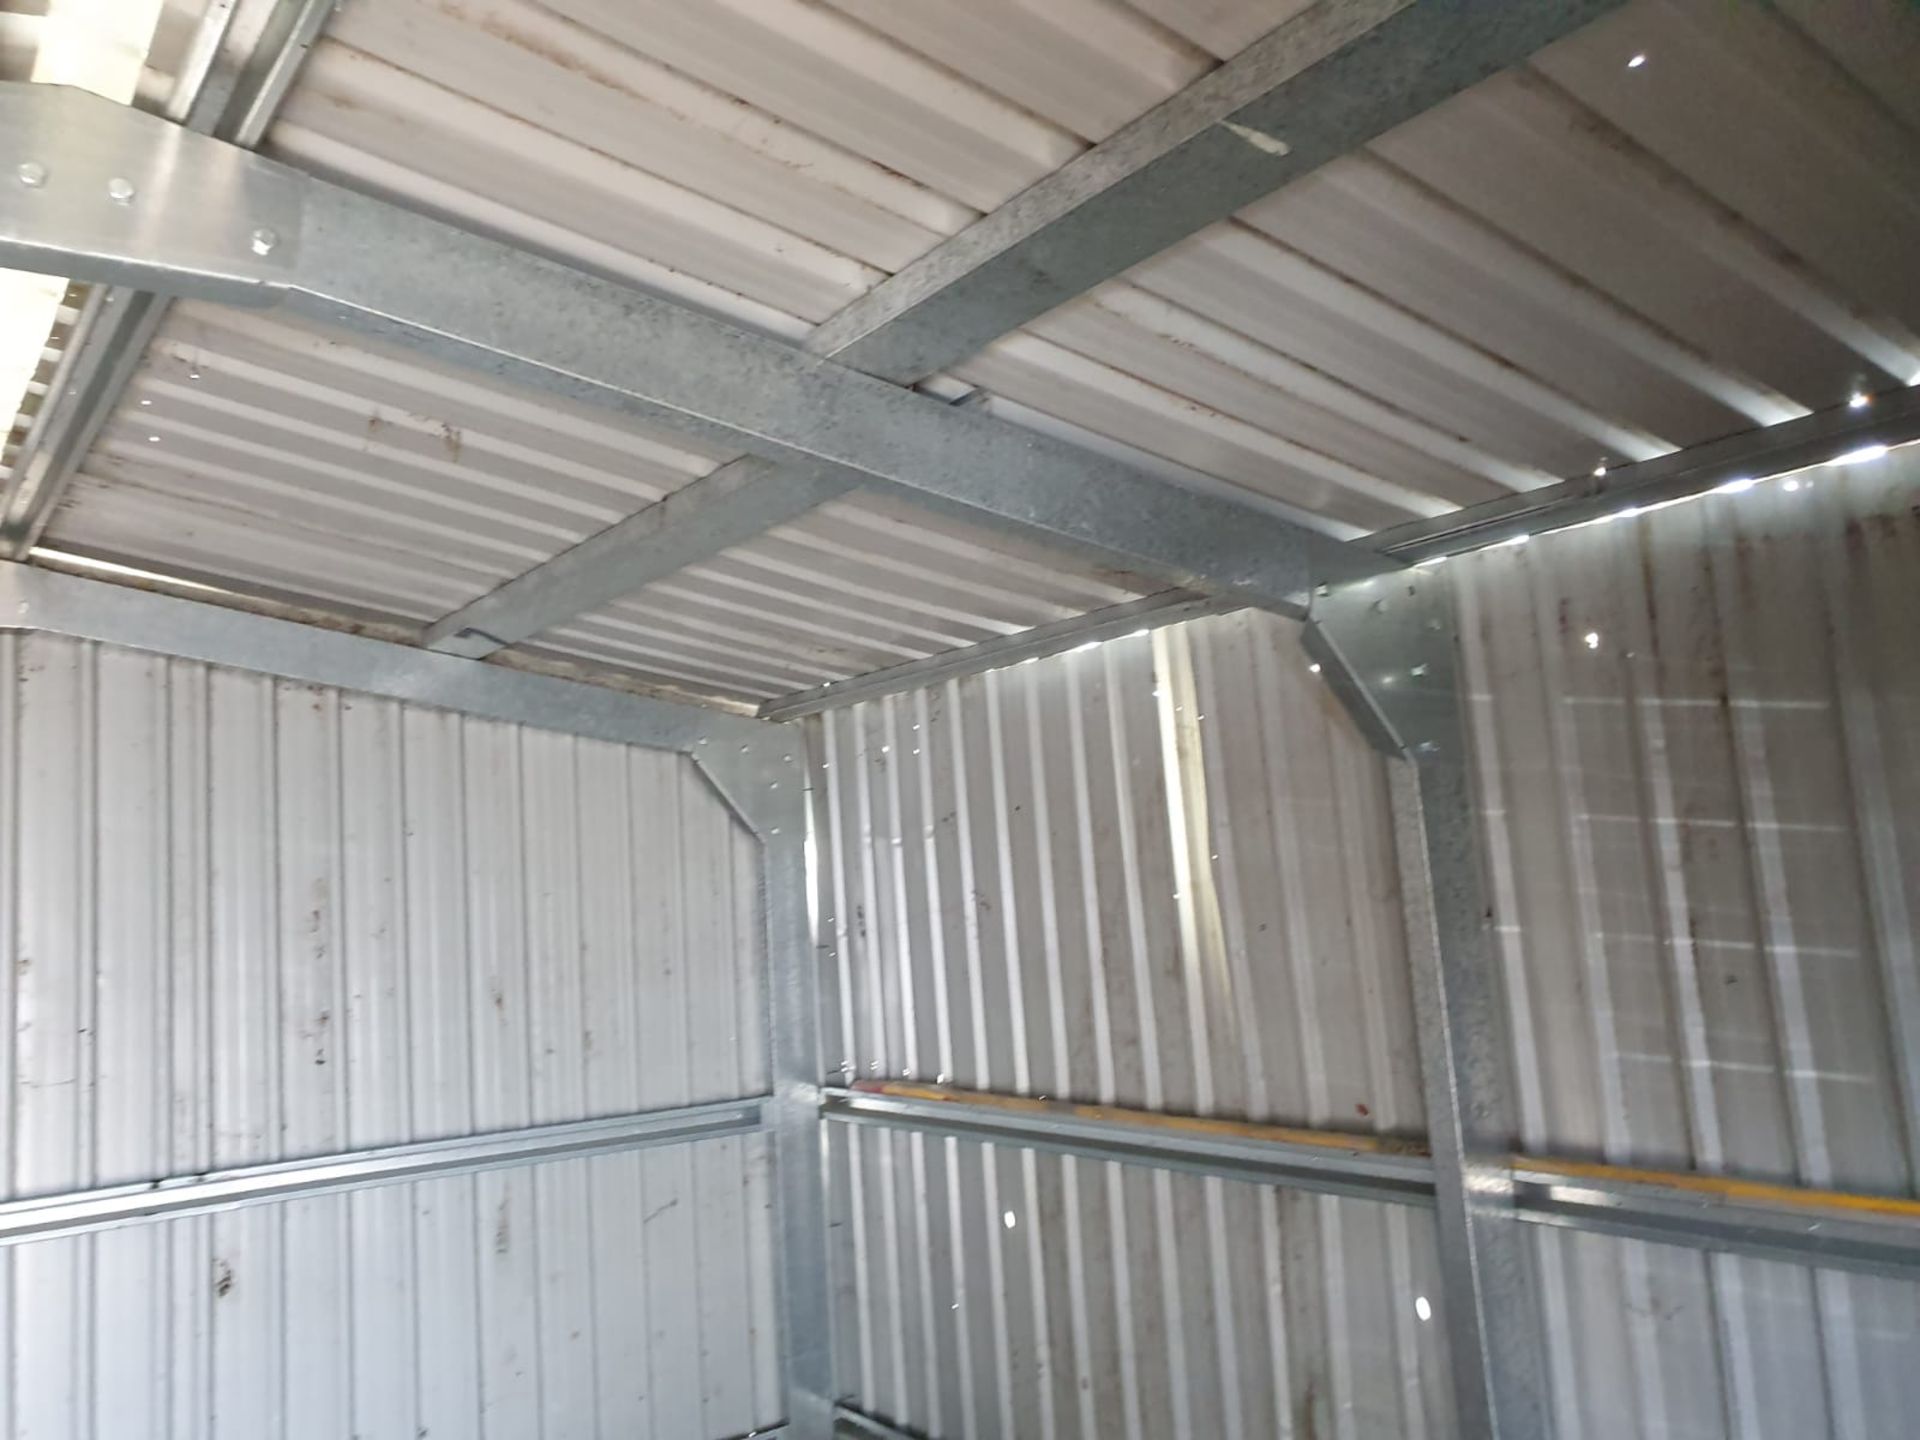 1 x Large Steel Storage Shed Container With Four Wooden Folding Doors - Approx Dimensions 5M x 5M - Image 2 of 16